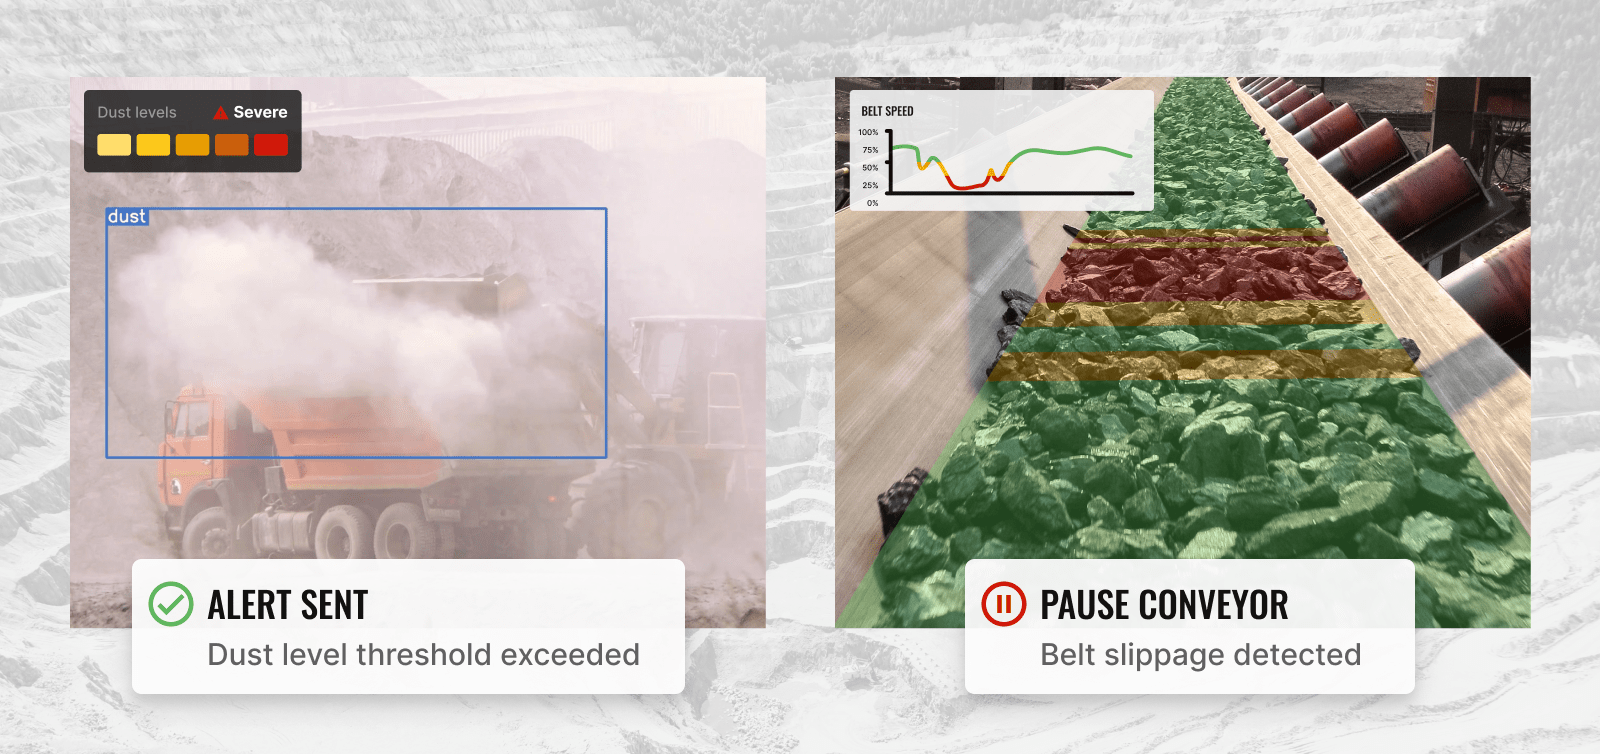 Featured image: New Dust Detection and Conveyor Belt Slippage AI Apps for the Mining Industry - Read full post: Enhancing Safety & Efficiency - New AI Video Analytic Apps for the Mining Industry